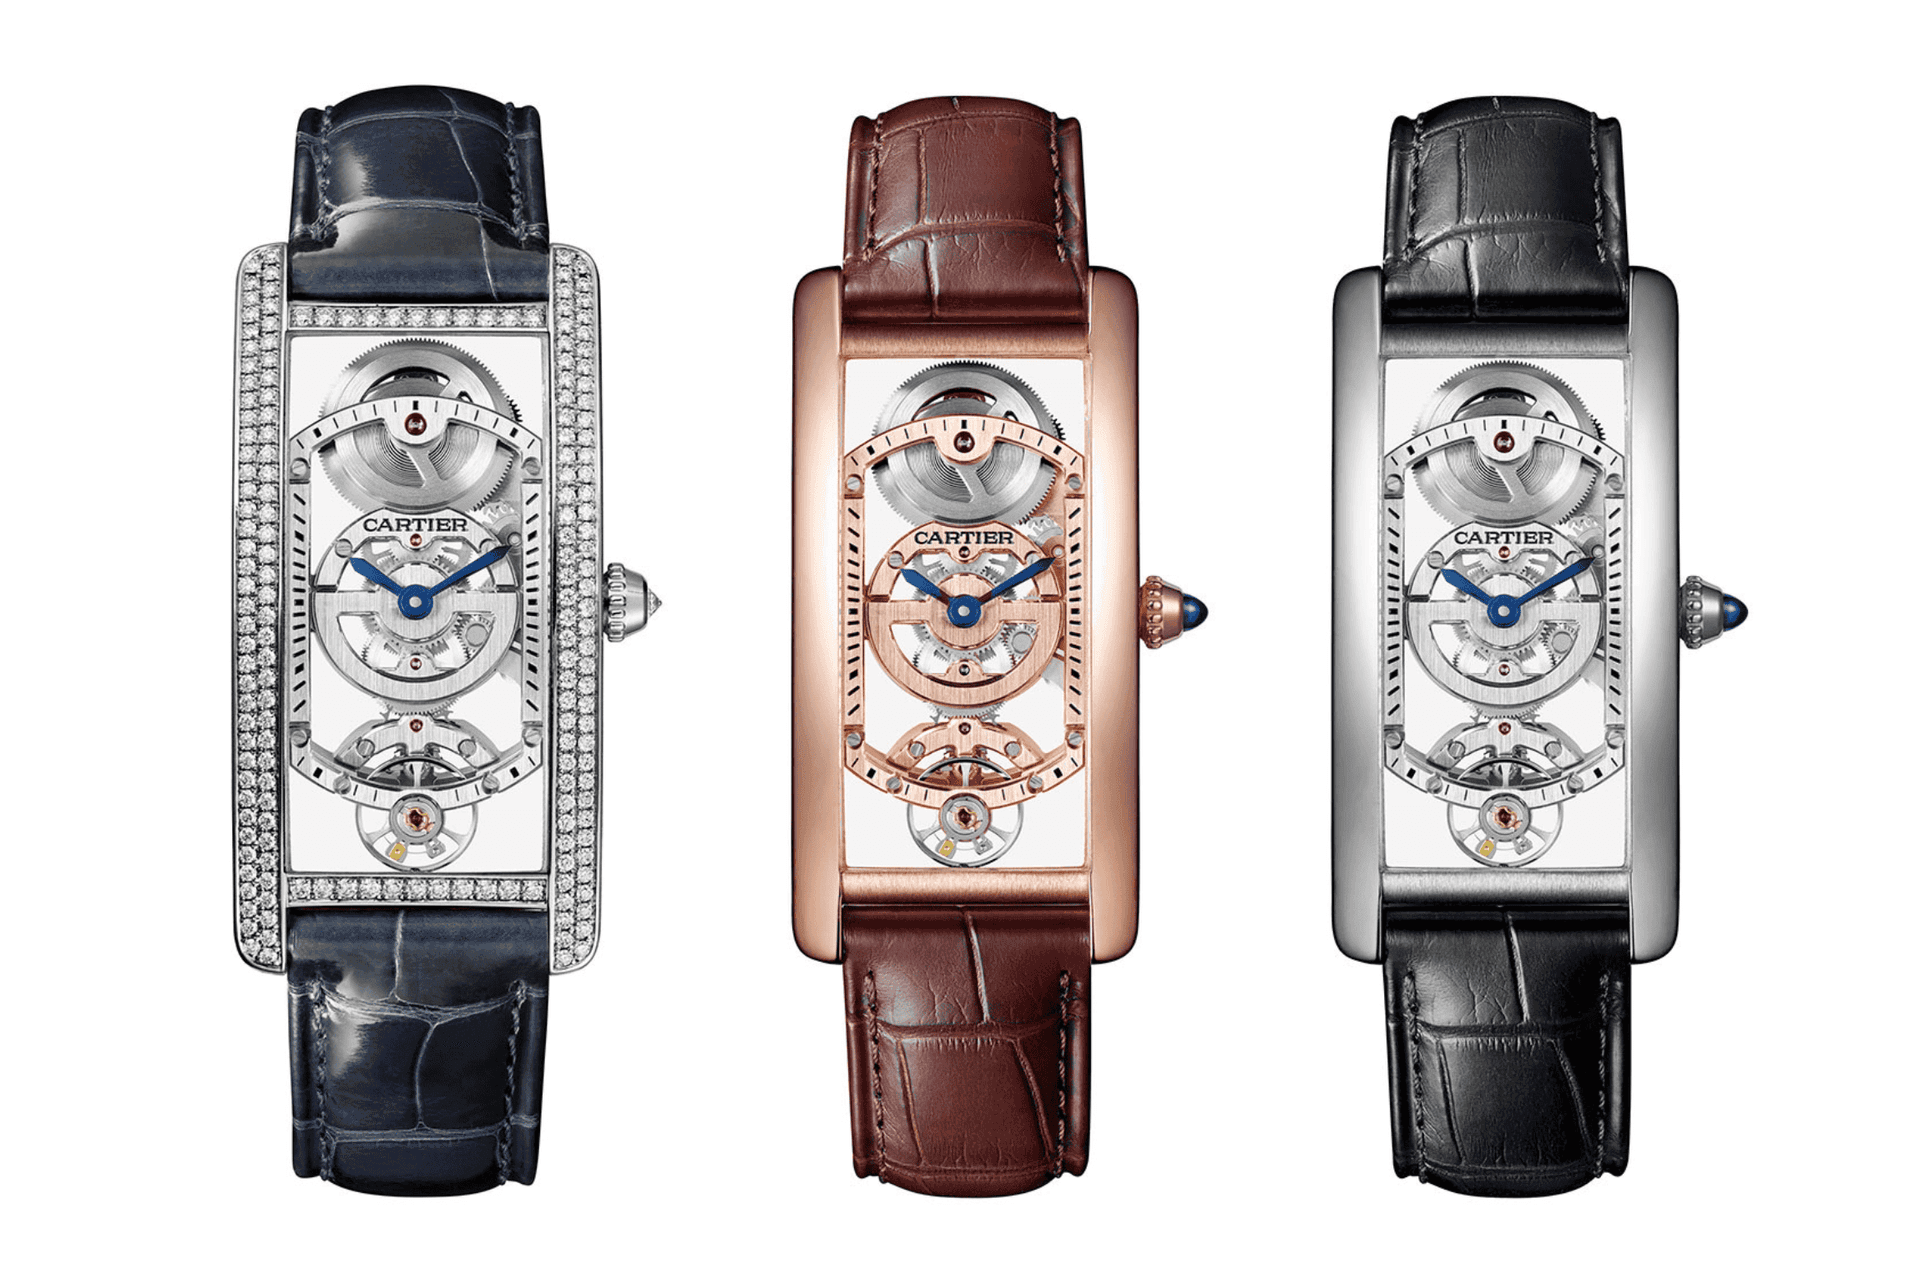 In 2017, Cartier released a series of skeletonized versions of the design, consisting of 100 pieces in platinum, 100 in pink gold, and a smaller number of platinum cases set with diamonds